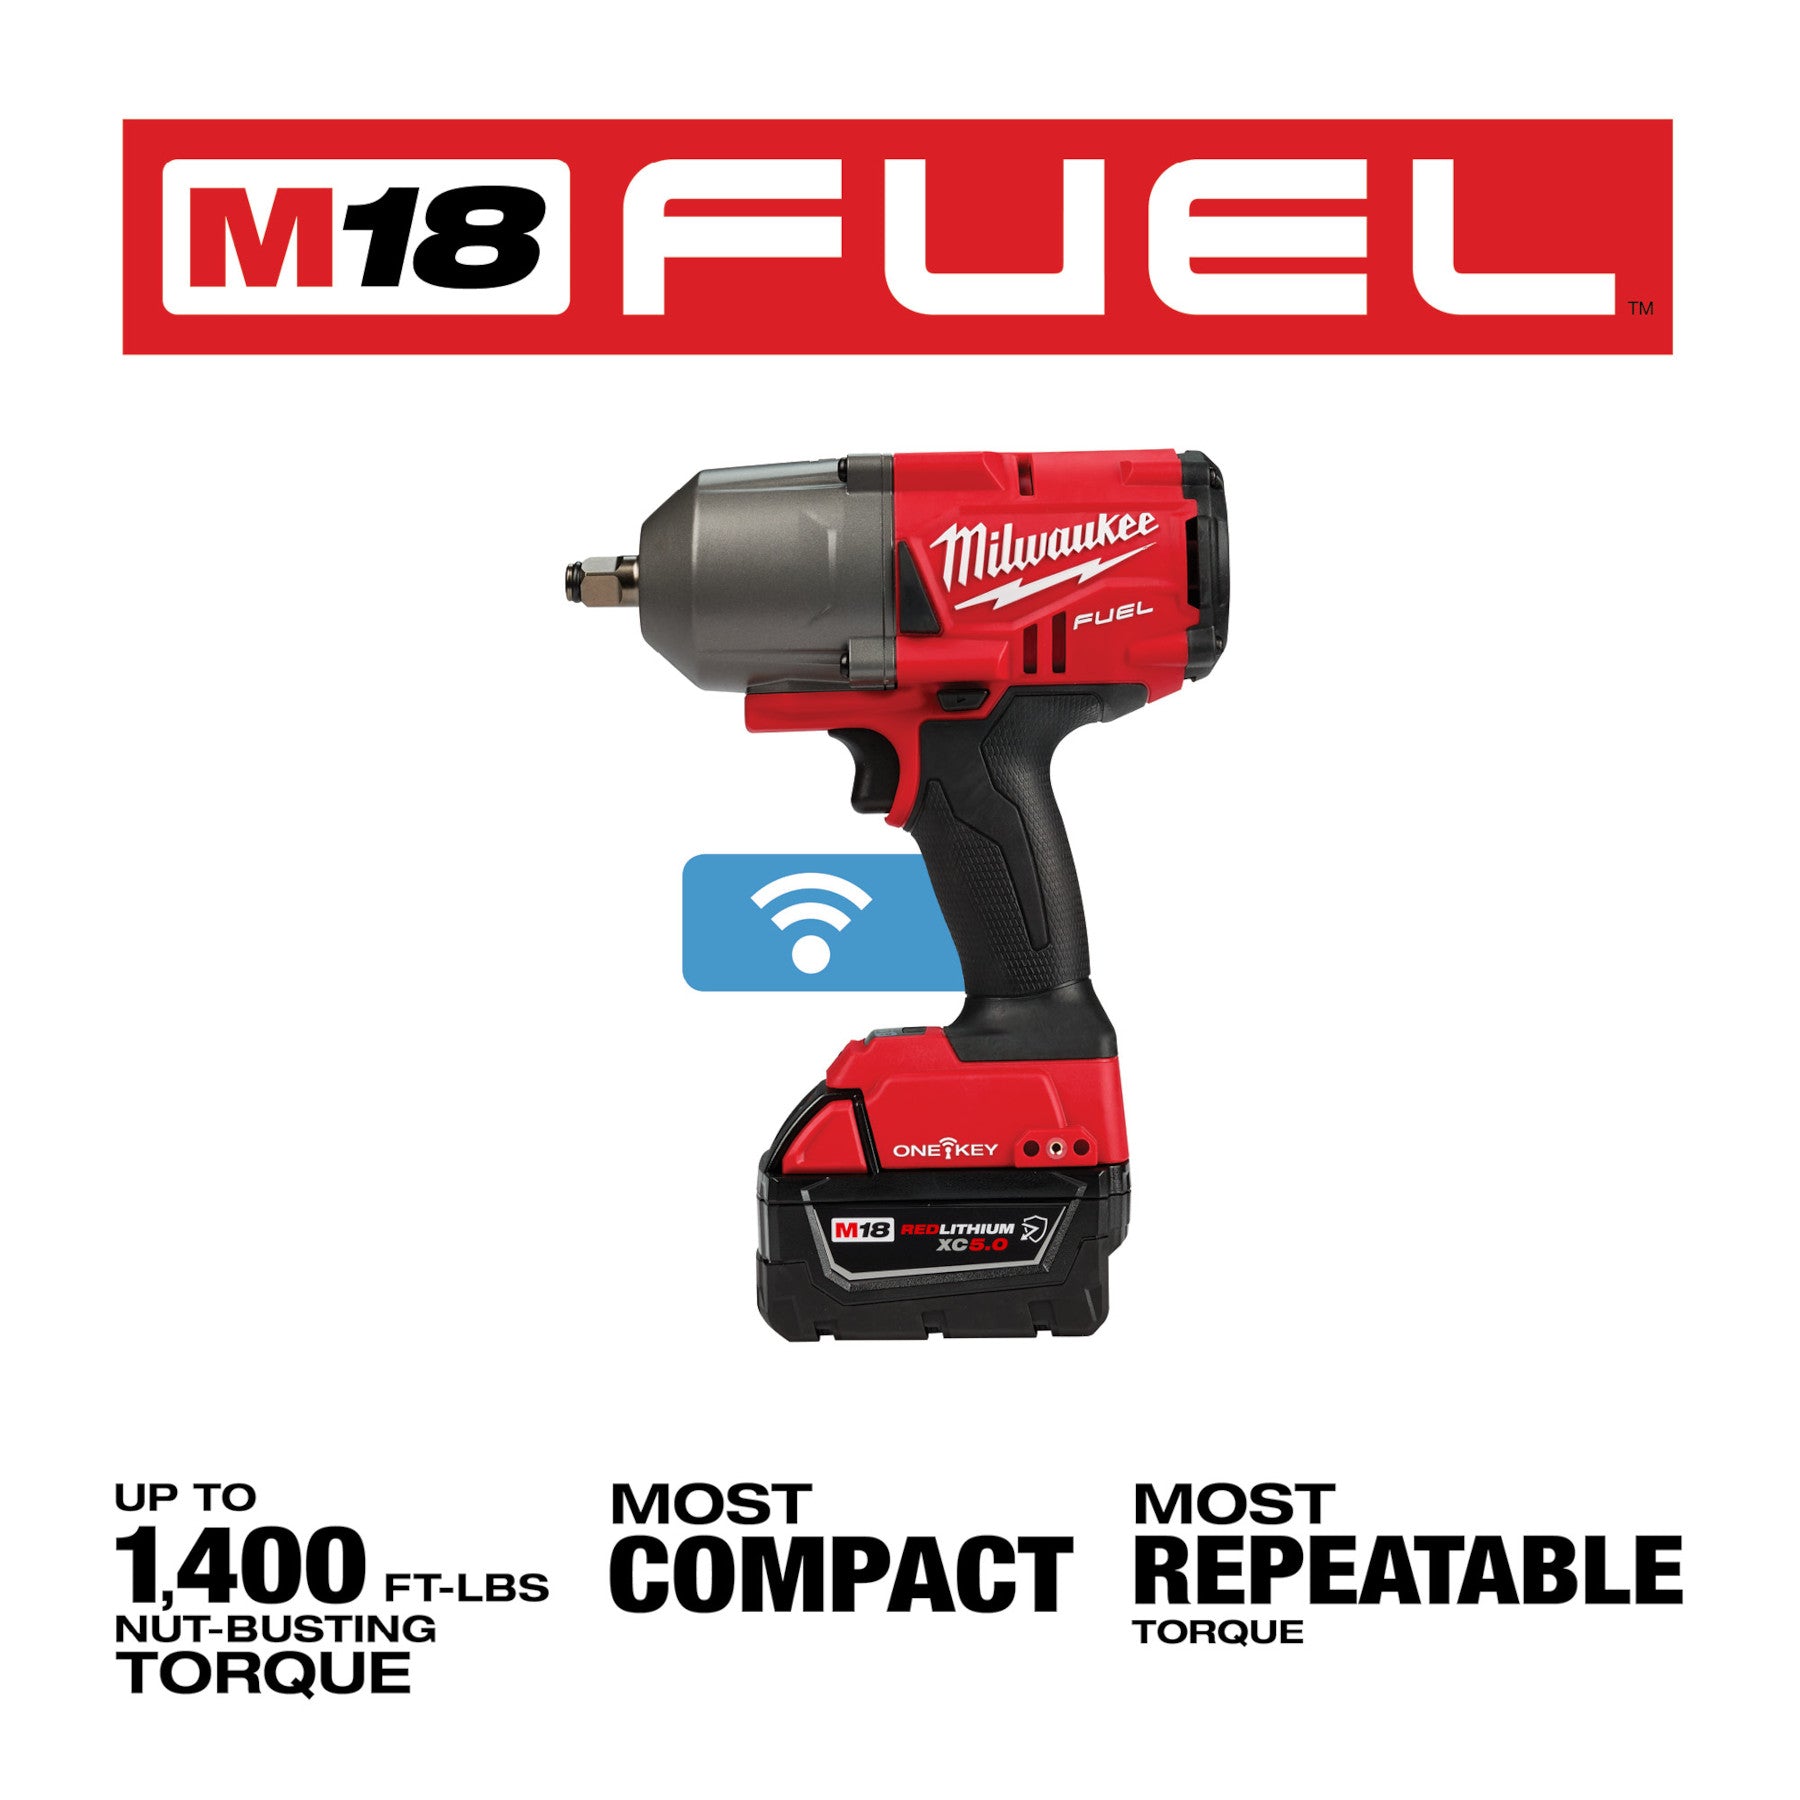 M18 FUEL™ w/ ONE-KEY™ High Torque Impact Wrench 1/2" Friction Ring Kit